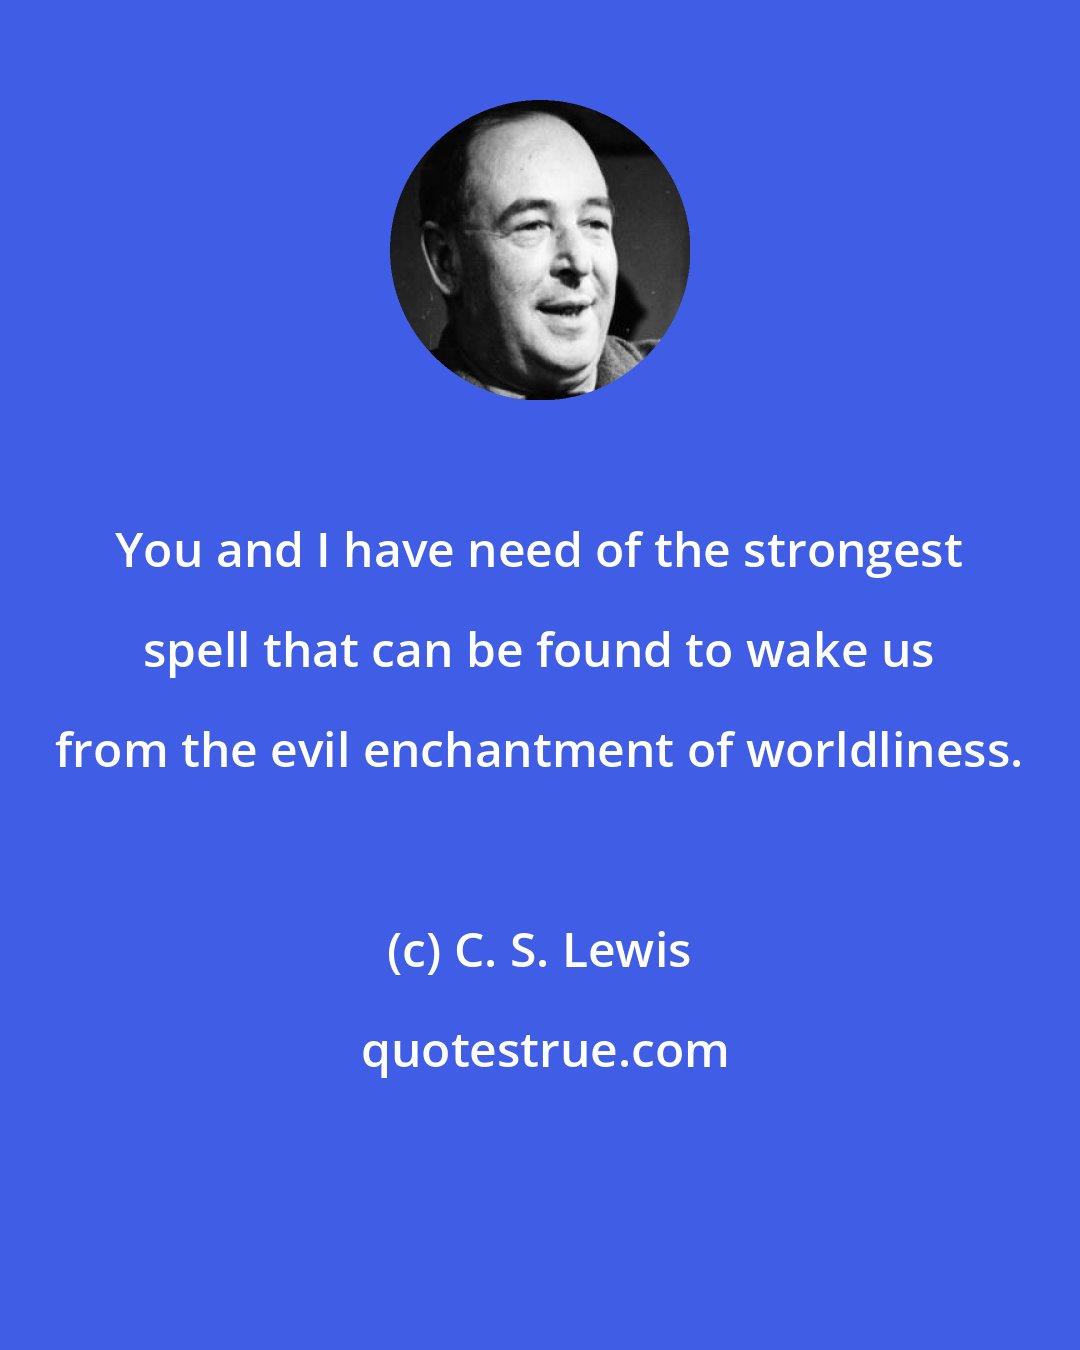 C. S. Lewis: You and I have need of the strongest spell that can be found to wake us from the evil enchantment of worldliness.